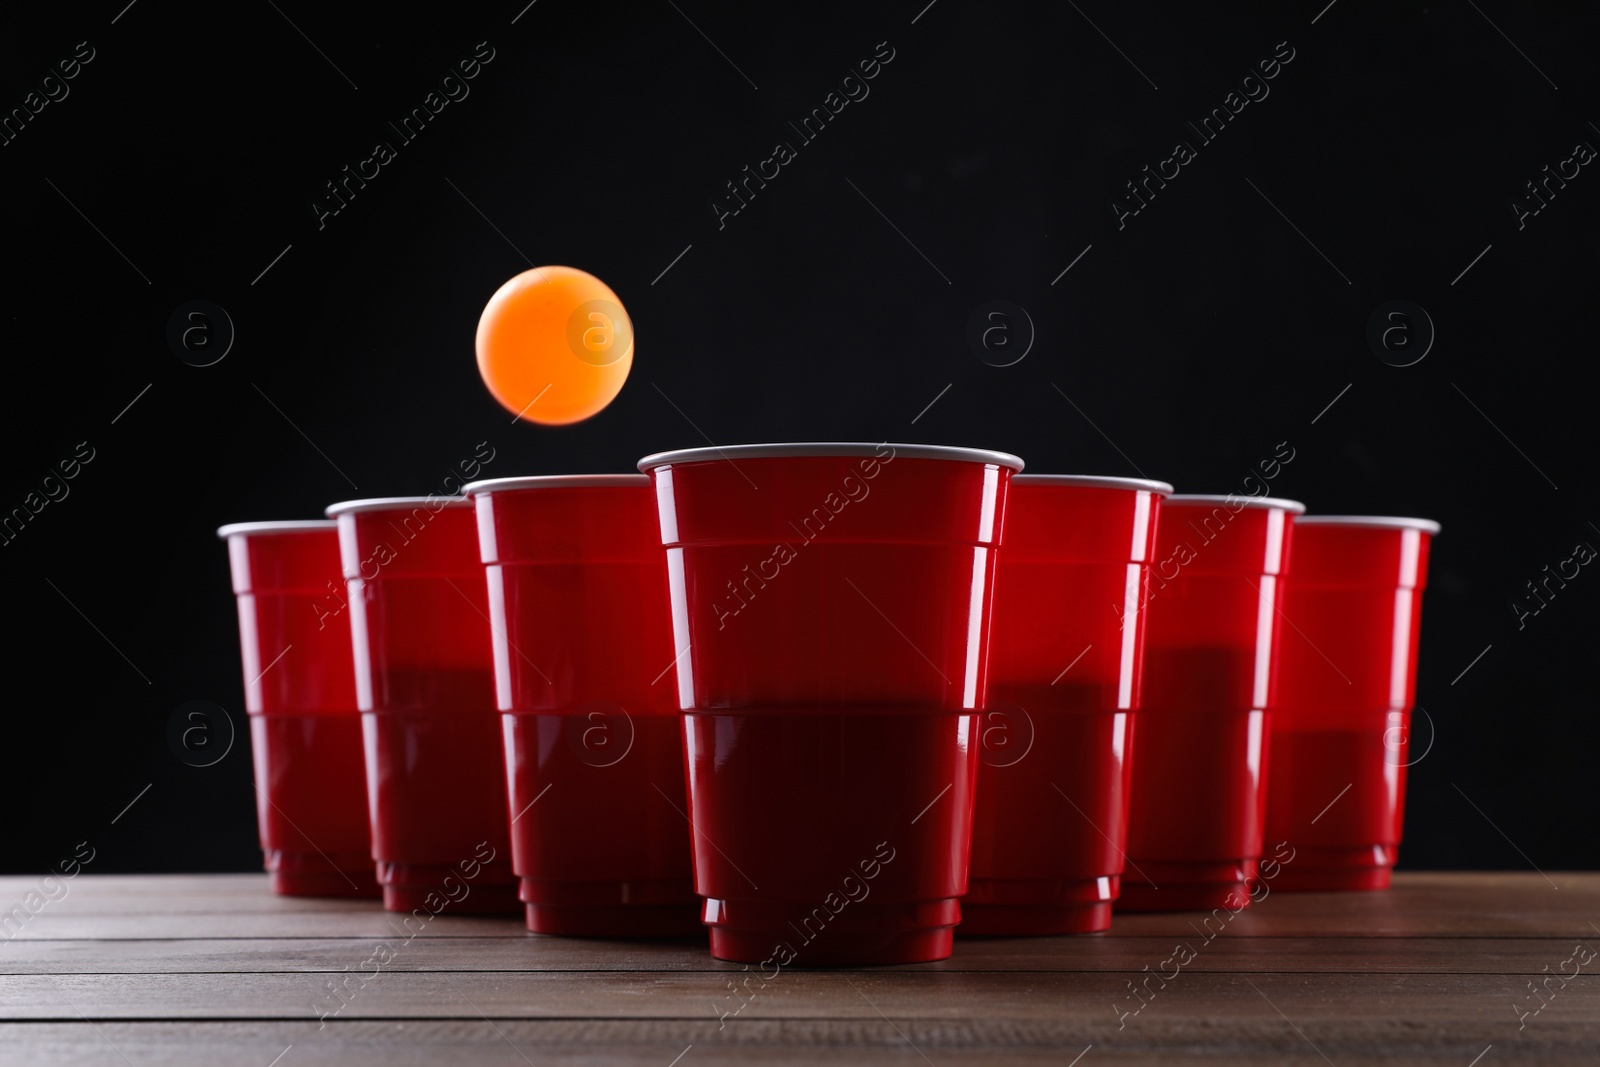 Photo of Plastic cups and ball for beer pong on wooden table against black background